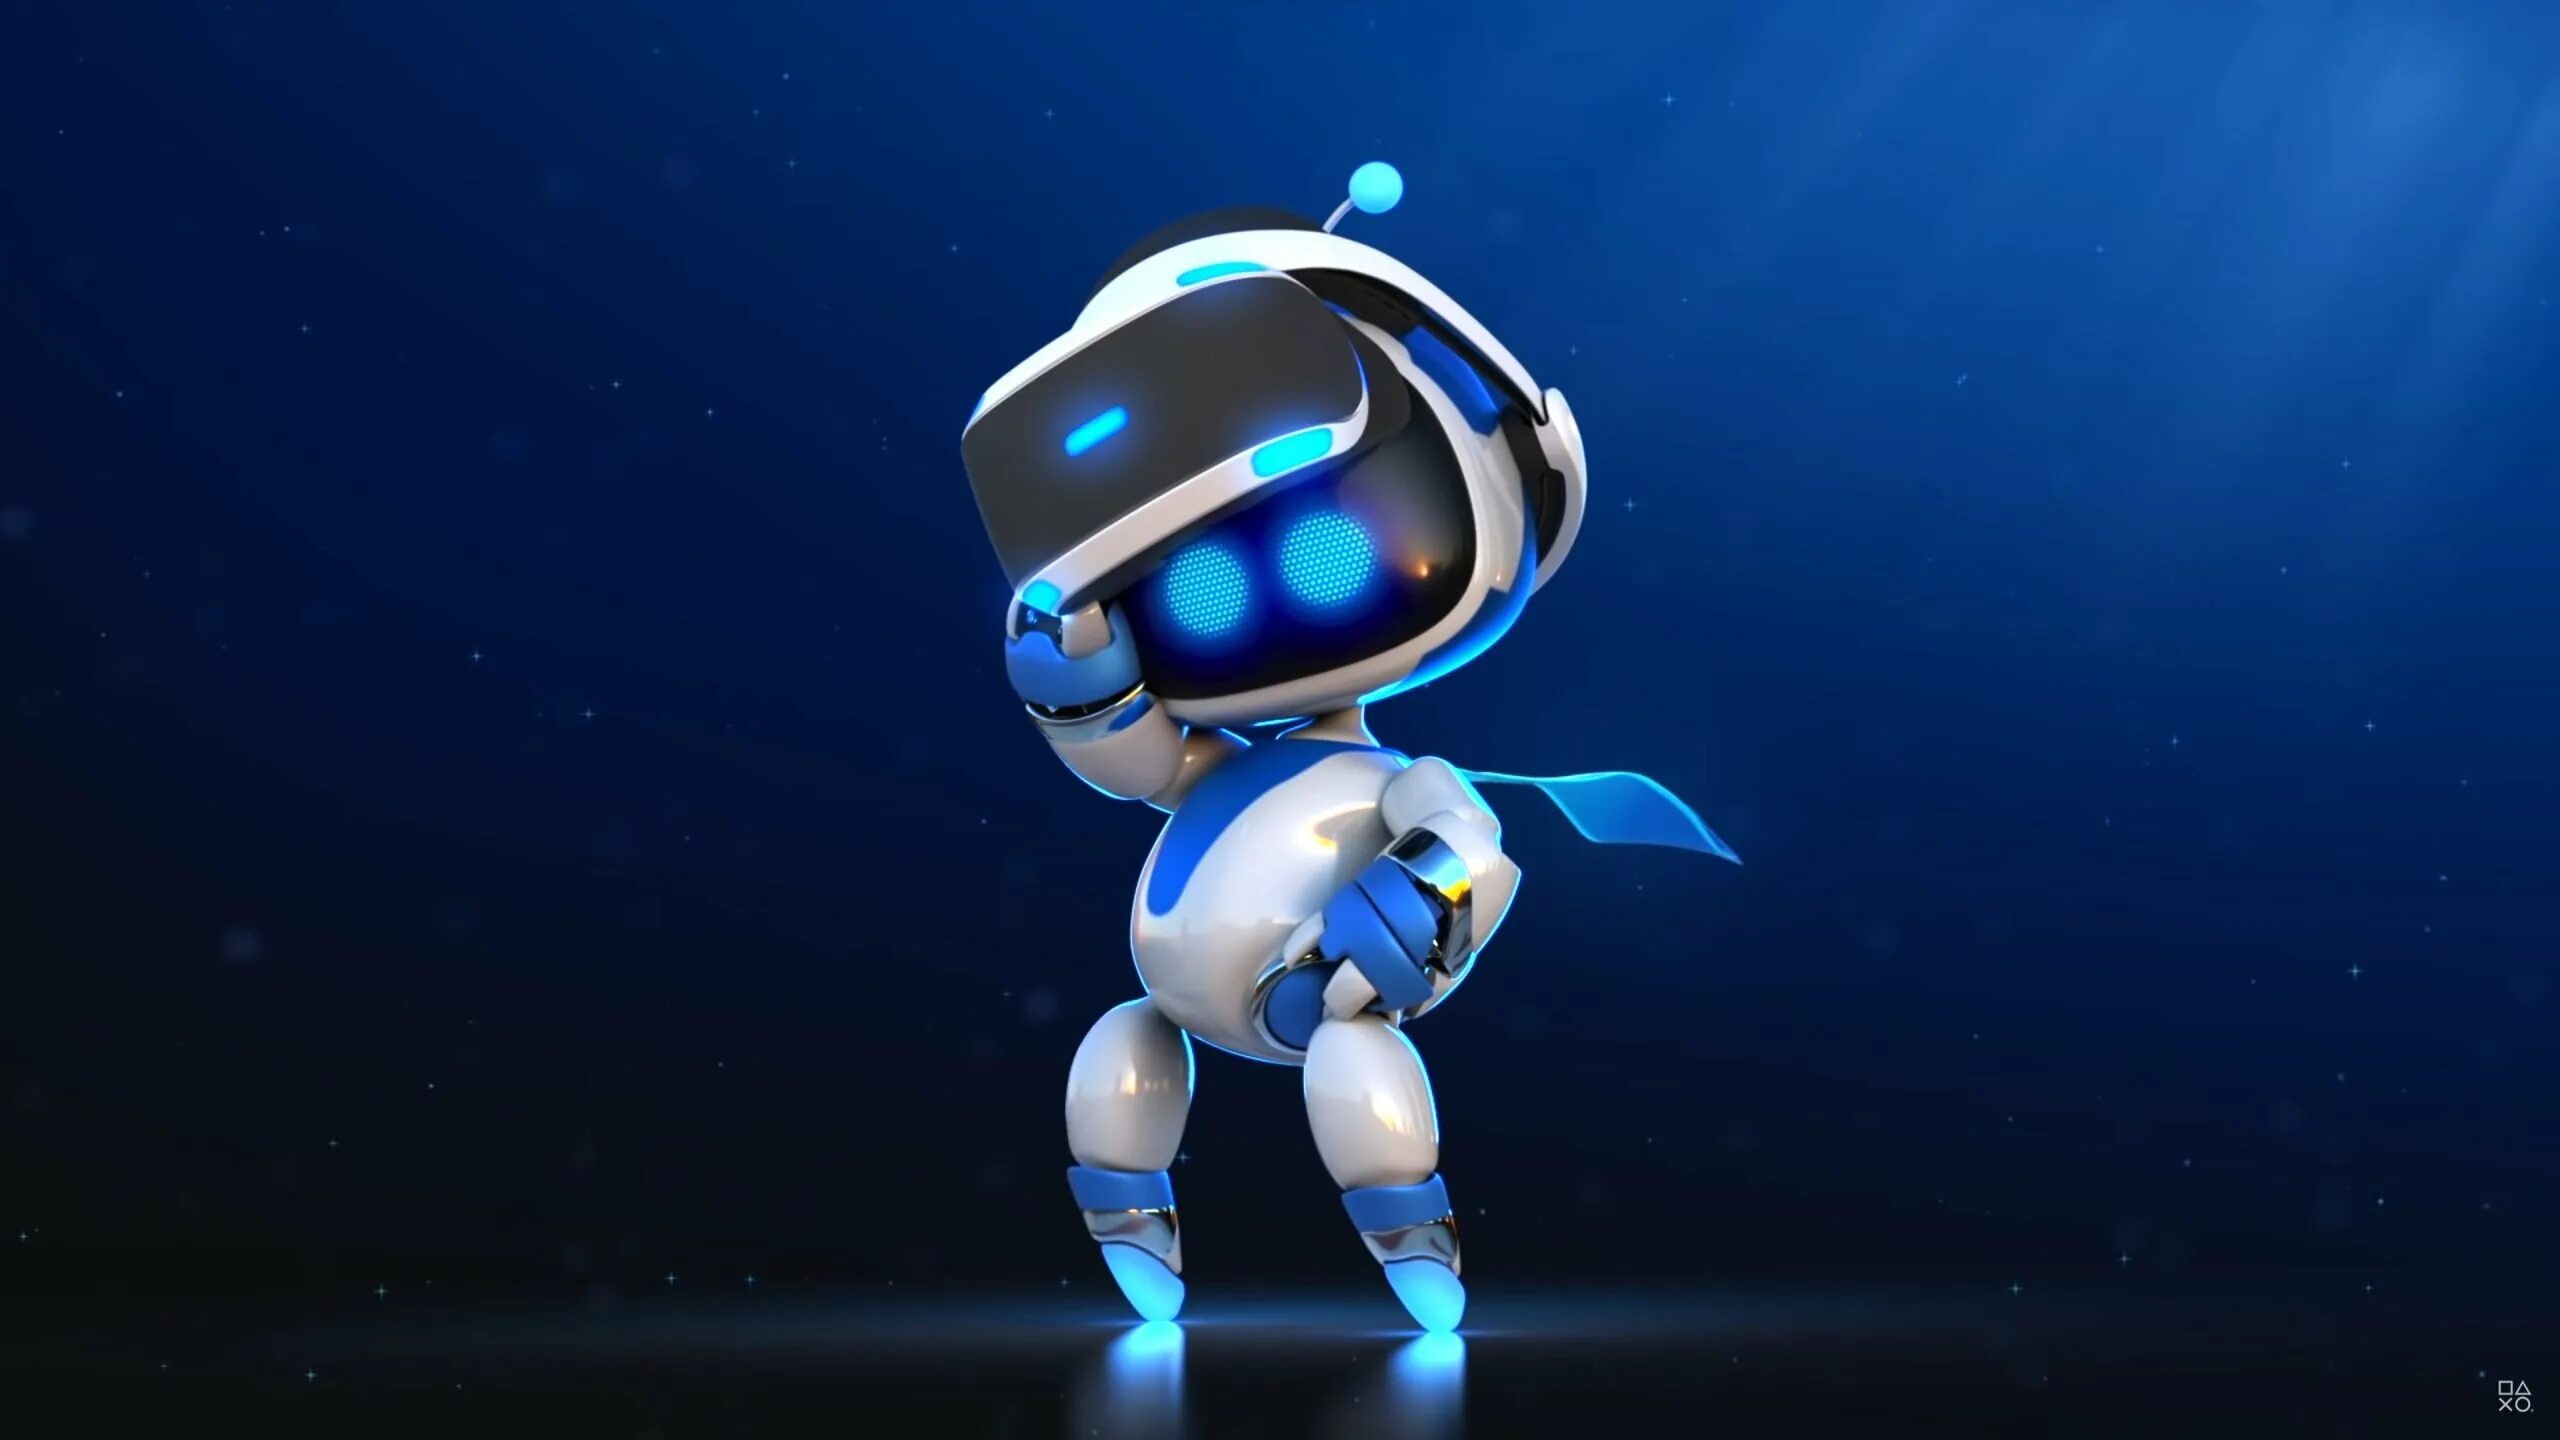 Astro bot ps4. Astro bot ps4 VR. Астро бот Рескью Мишн. Astro bot Rescue Mission ps5. Игра робота playstation